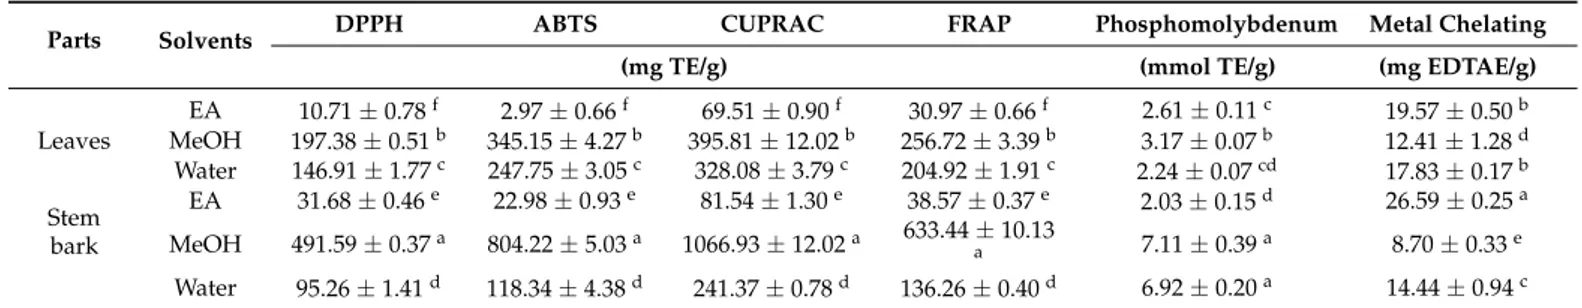 Table 3. Antioxidant properties of the tested extracts.